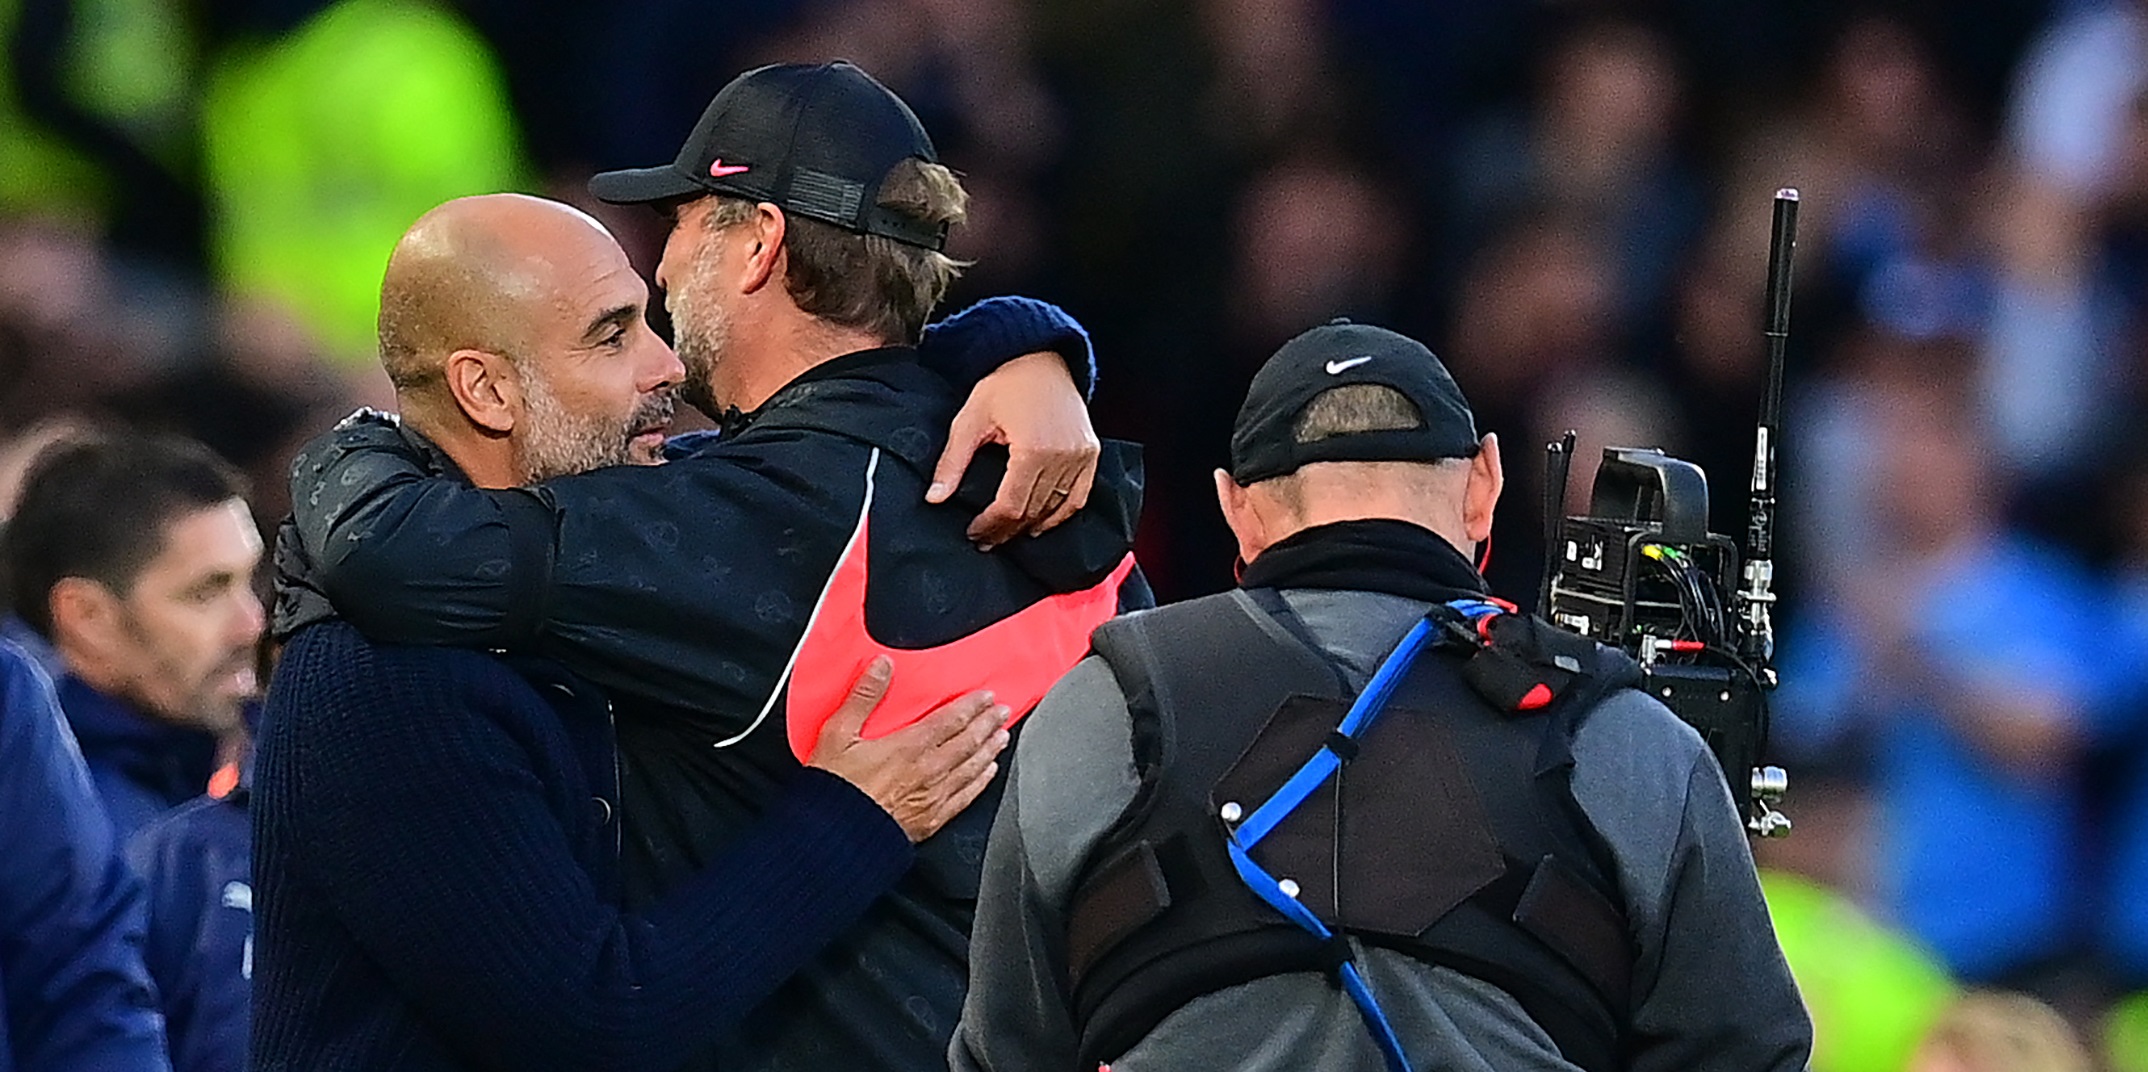 ‘I don’t buy it’ – Pep Guardiola dismisses claims that his Manchester City side should be ’10 points clear’ of Liverpool in the Premier League title race